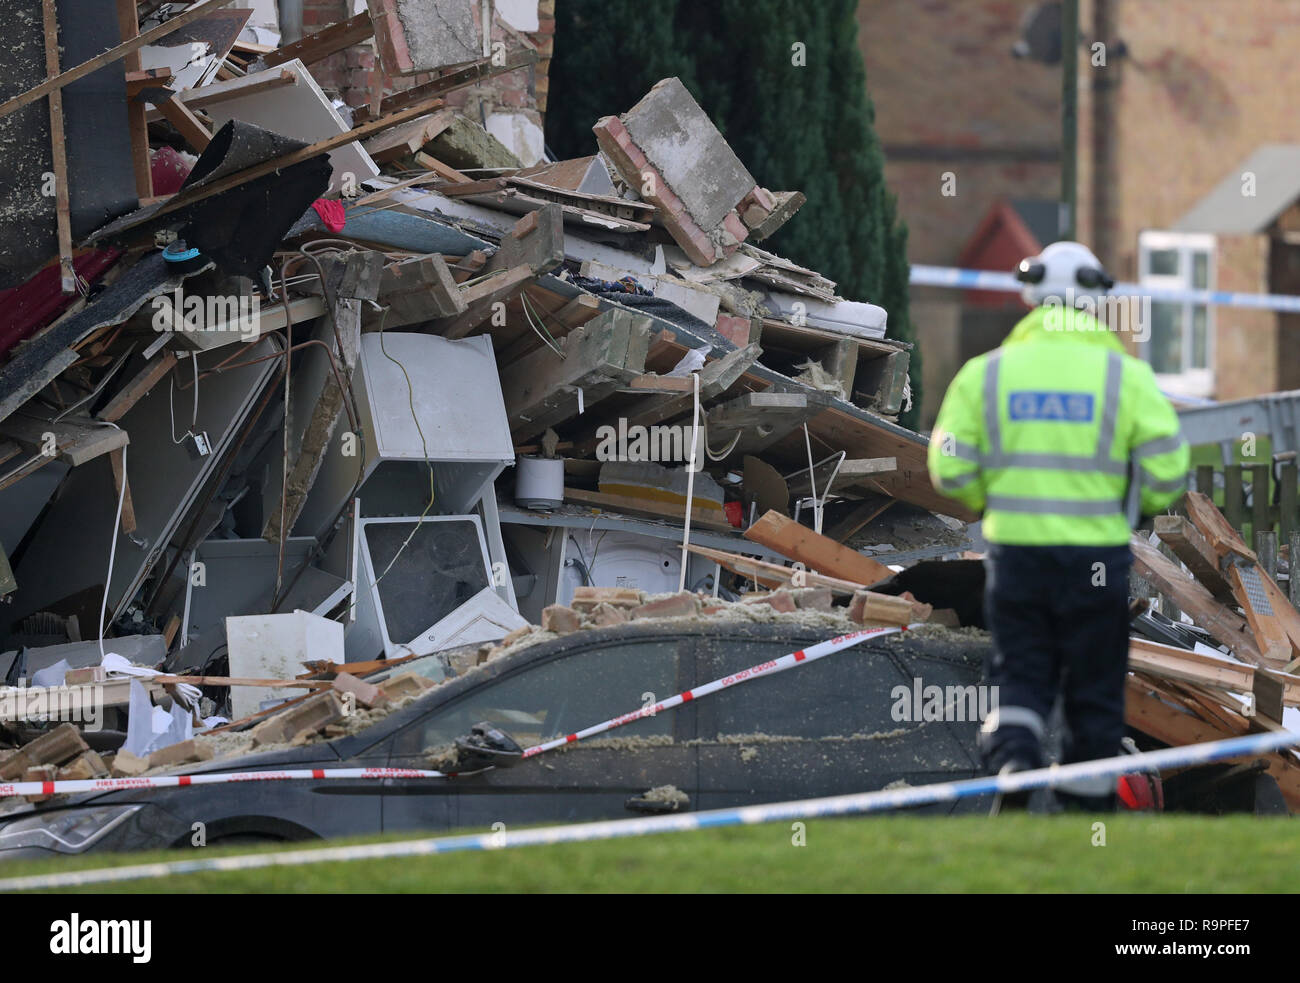 A gas engineer passes a vehicle crushed by debris in Launcelot Close, Andover, where Hampshire Police say that the body of a man has been found after an explosion caused a building to collapse this morning. Stock Photo